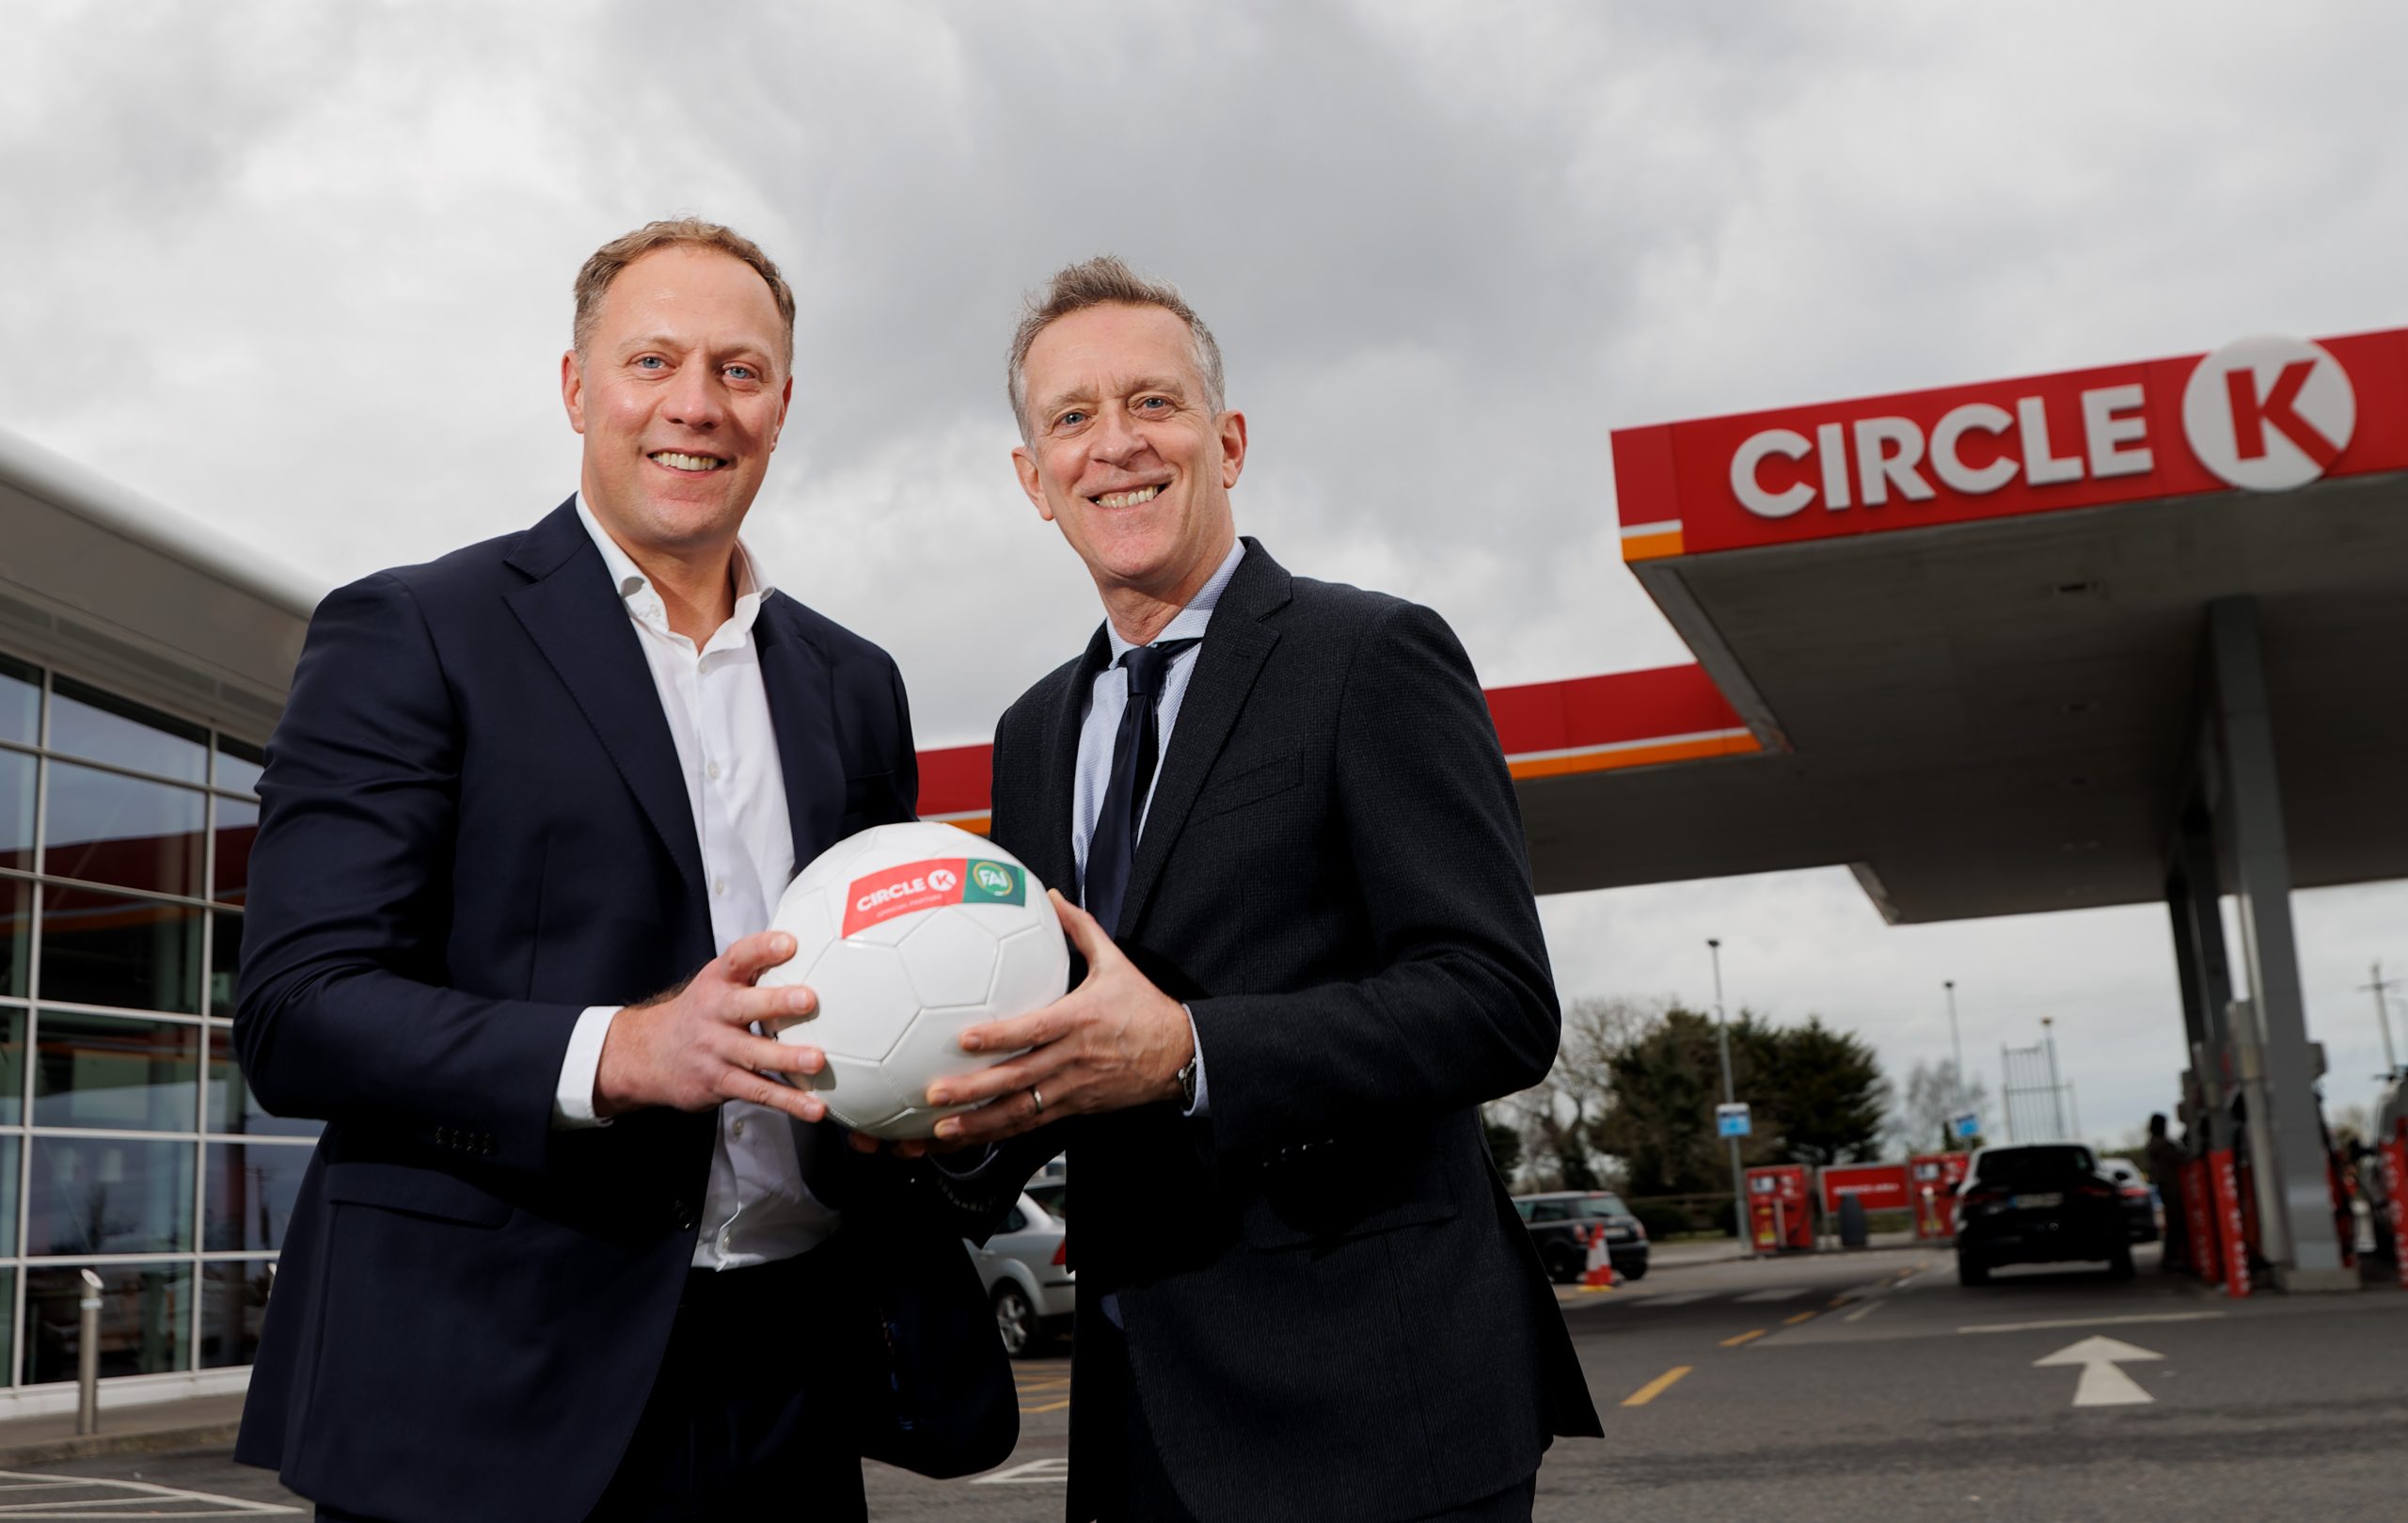 Circle K announced fuel discount at participating service stations in support of the Ireland Women’s National Football Team